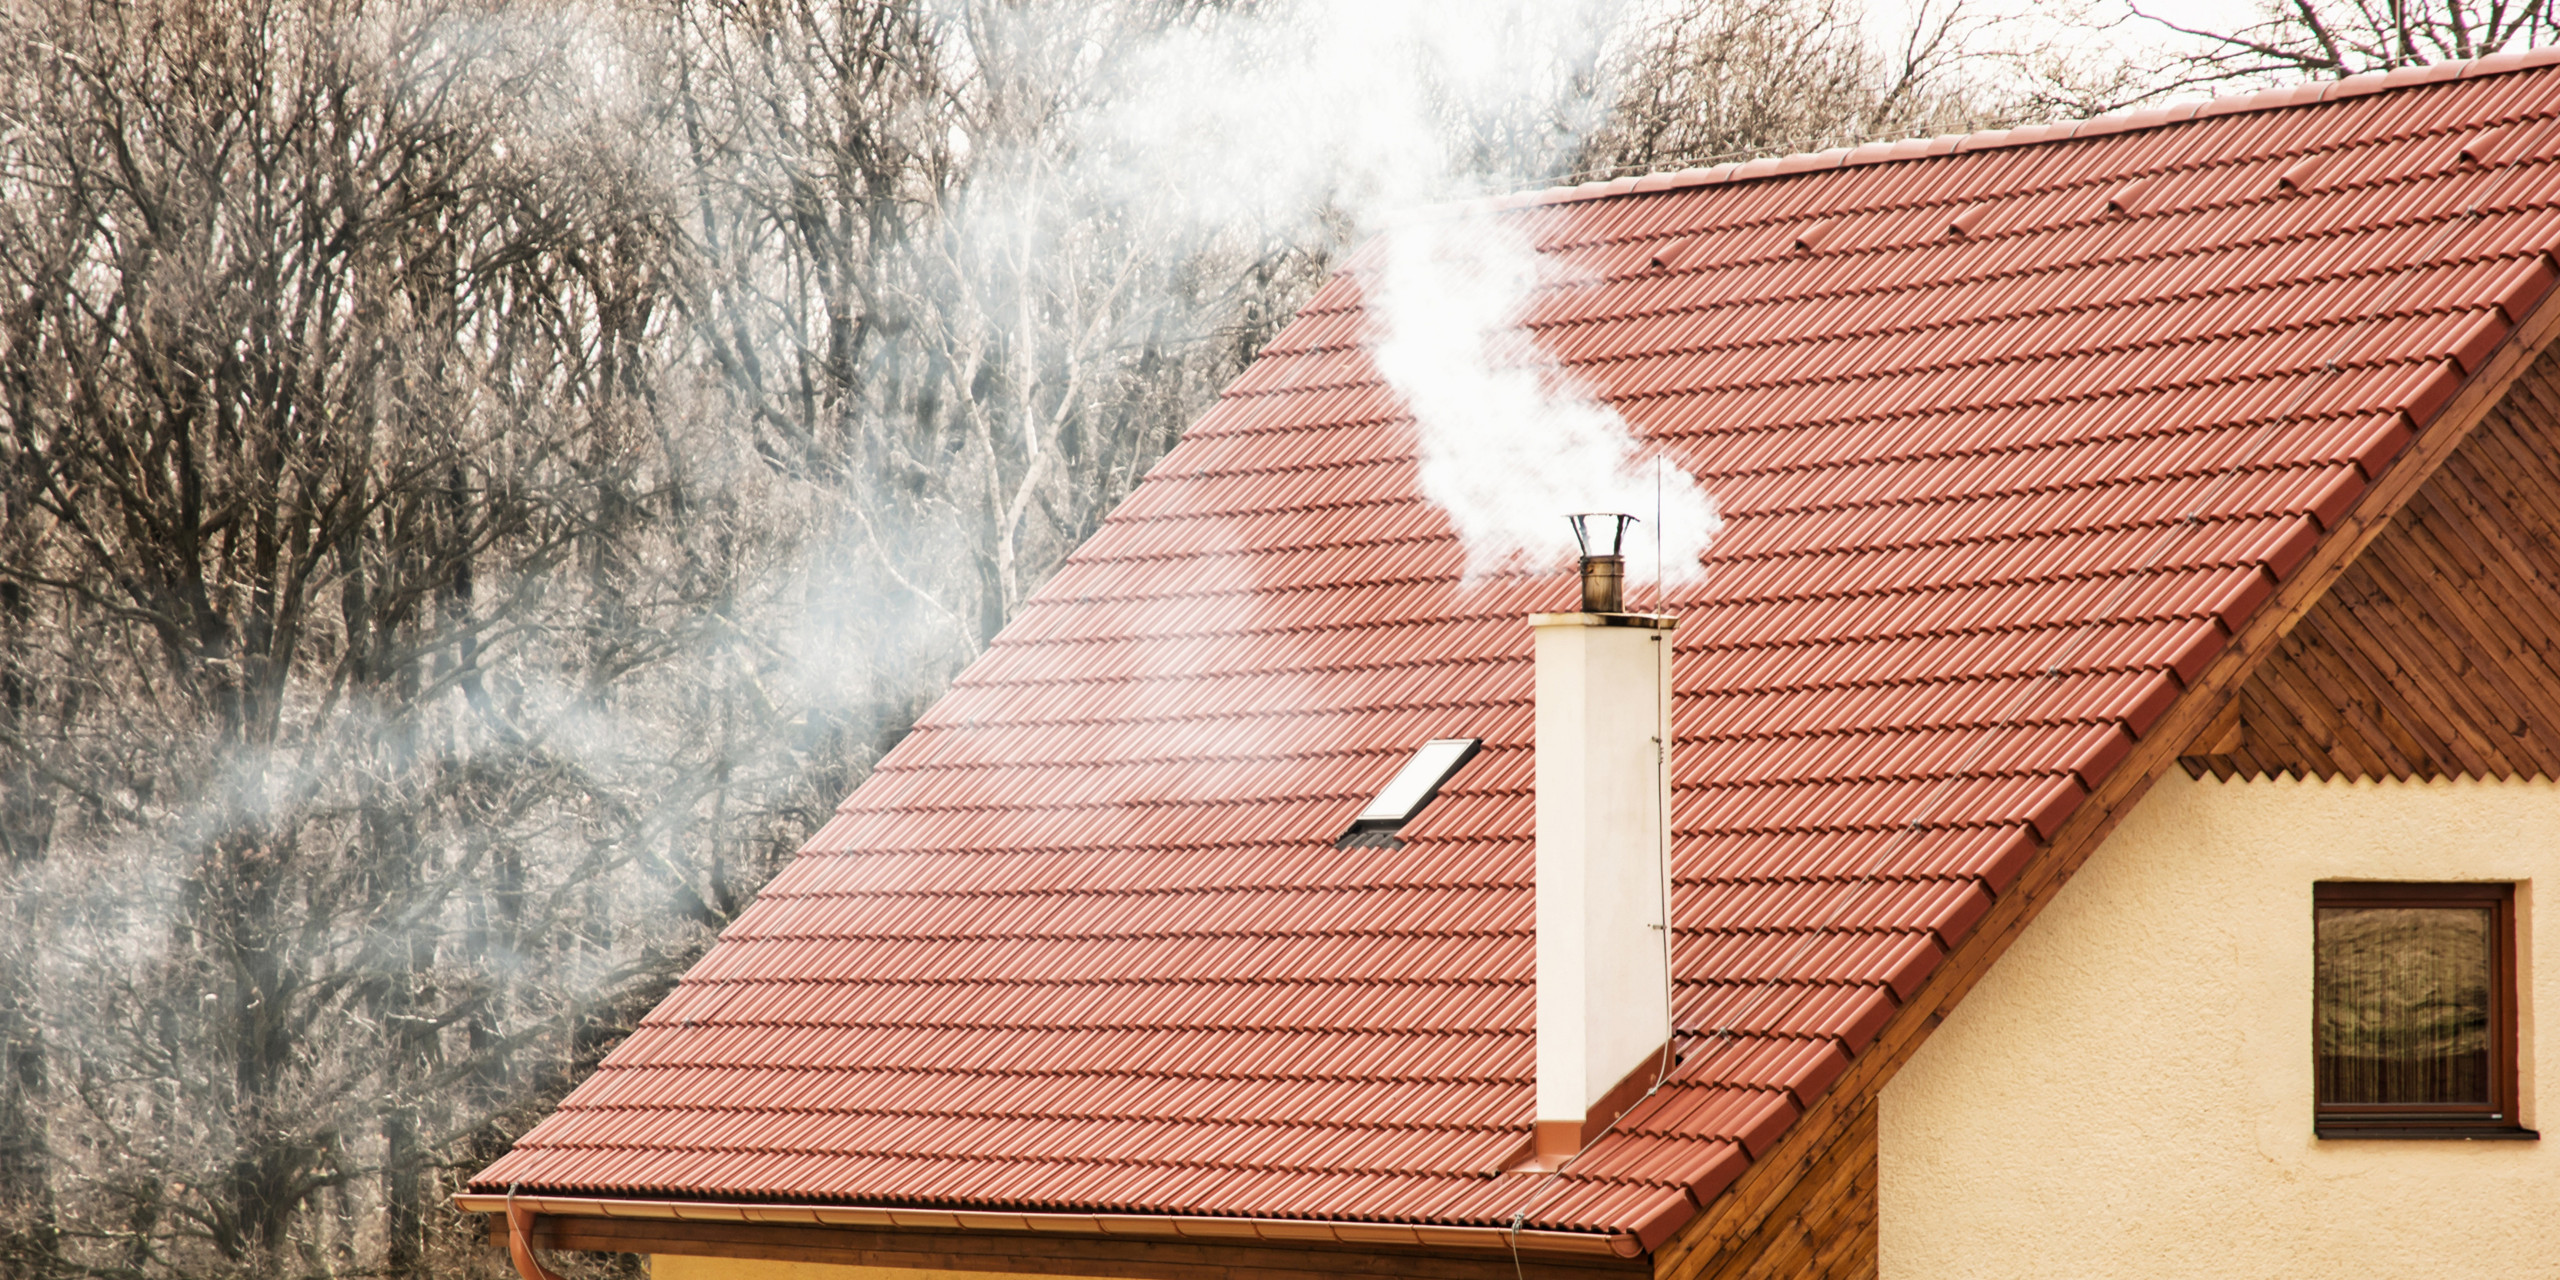 Chimney Cleaning by general contractor